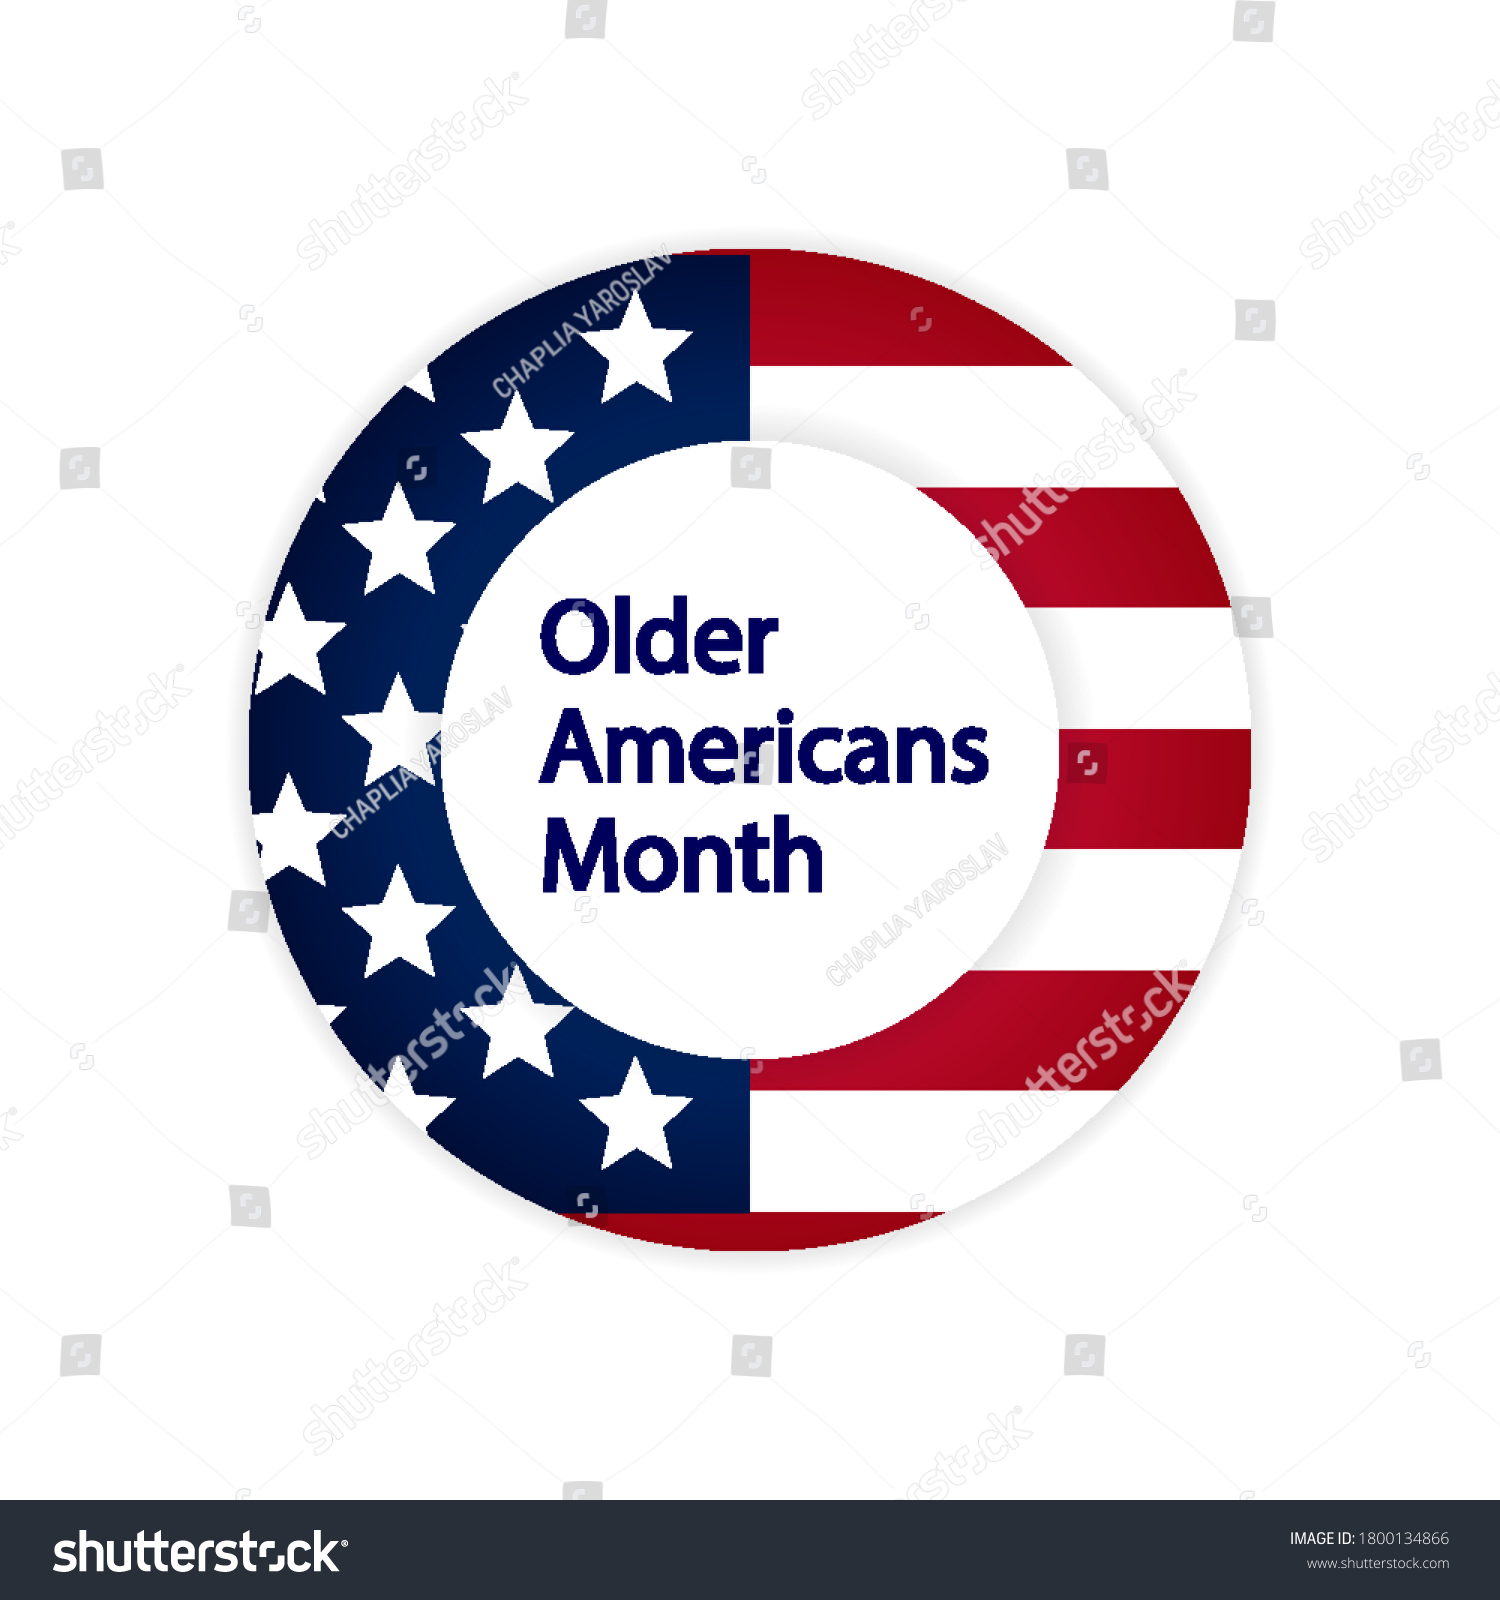 Older Americans Month Icon Vector Art Stock Vector (Royalty Free